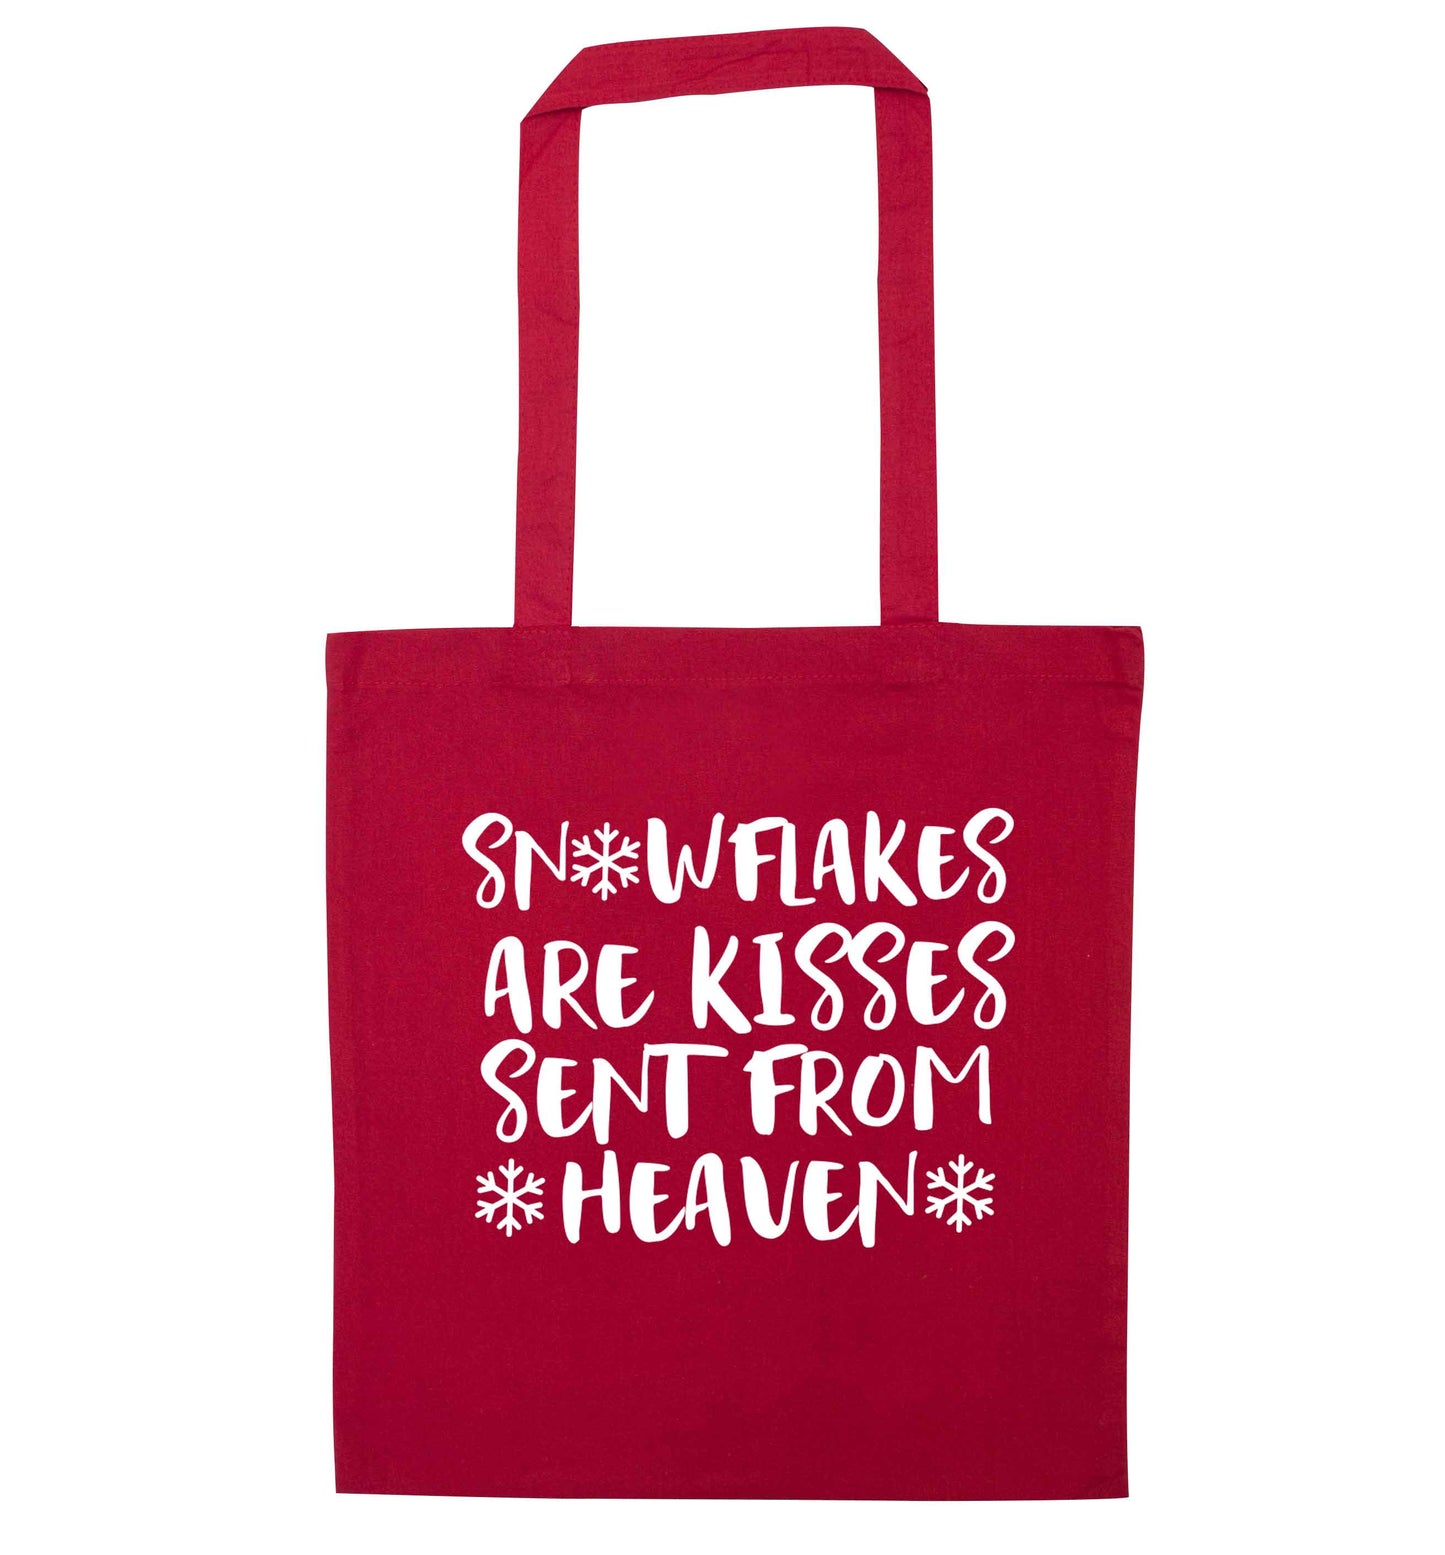 Snowflakes are kisses sent from heaven red tote bag